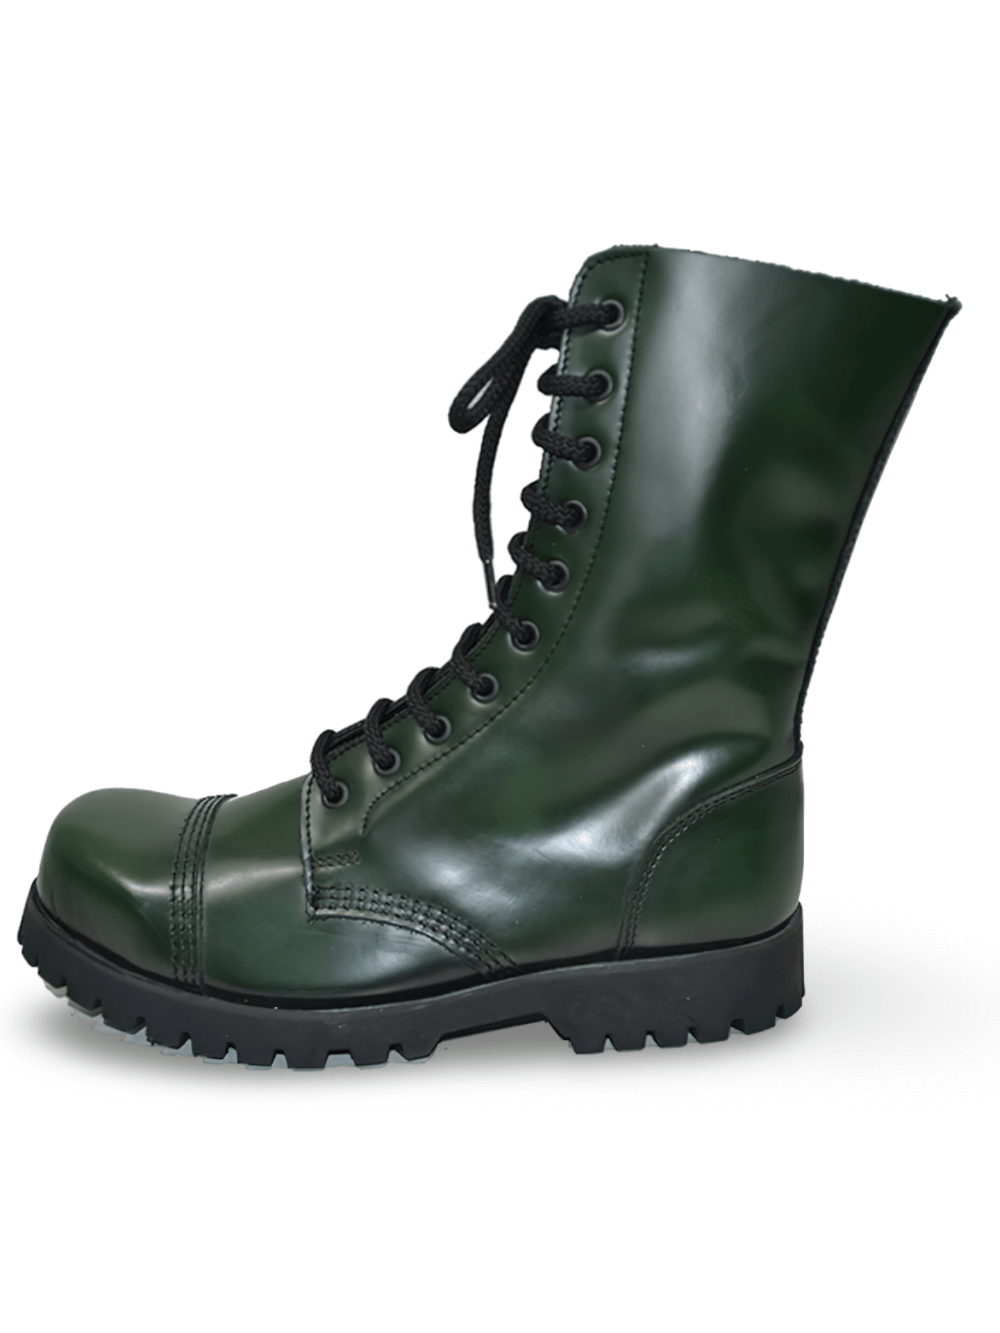 Unisex Military Leather Ranger Boots with Steel Toe